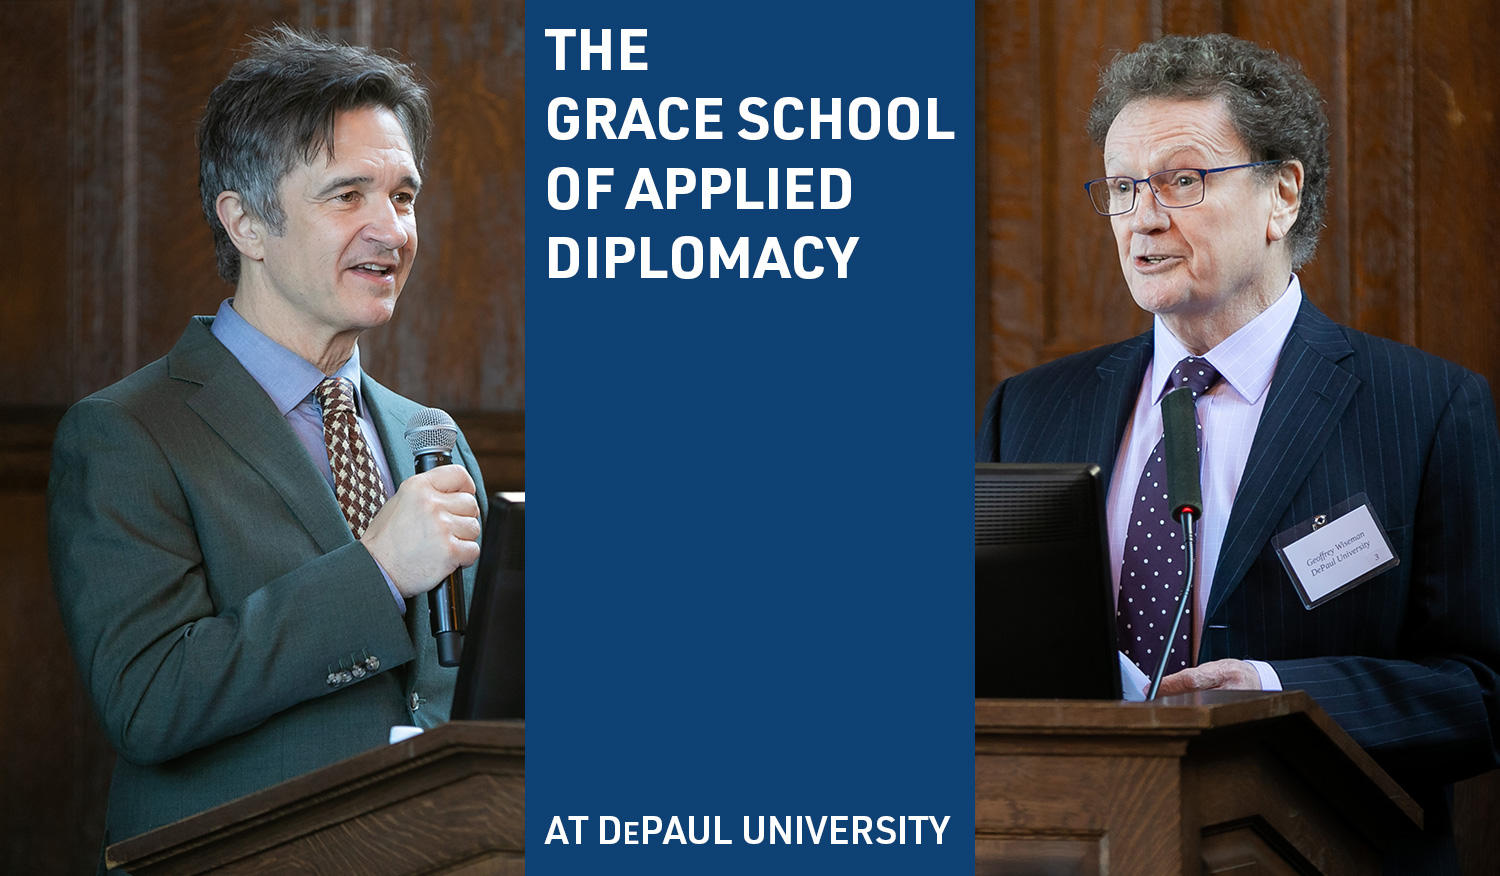 The Grace School of Applied Diplomacy